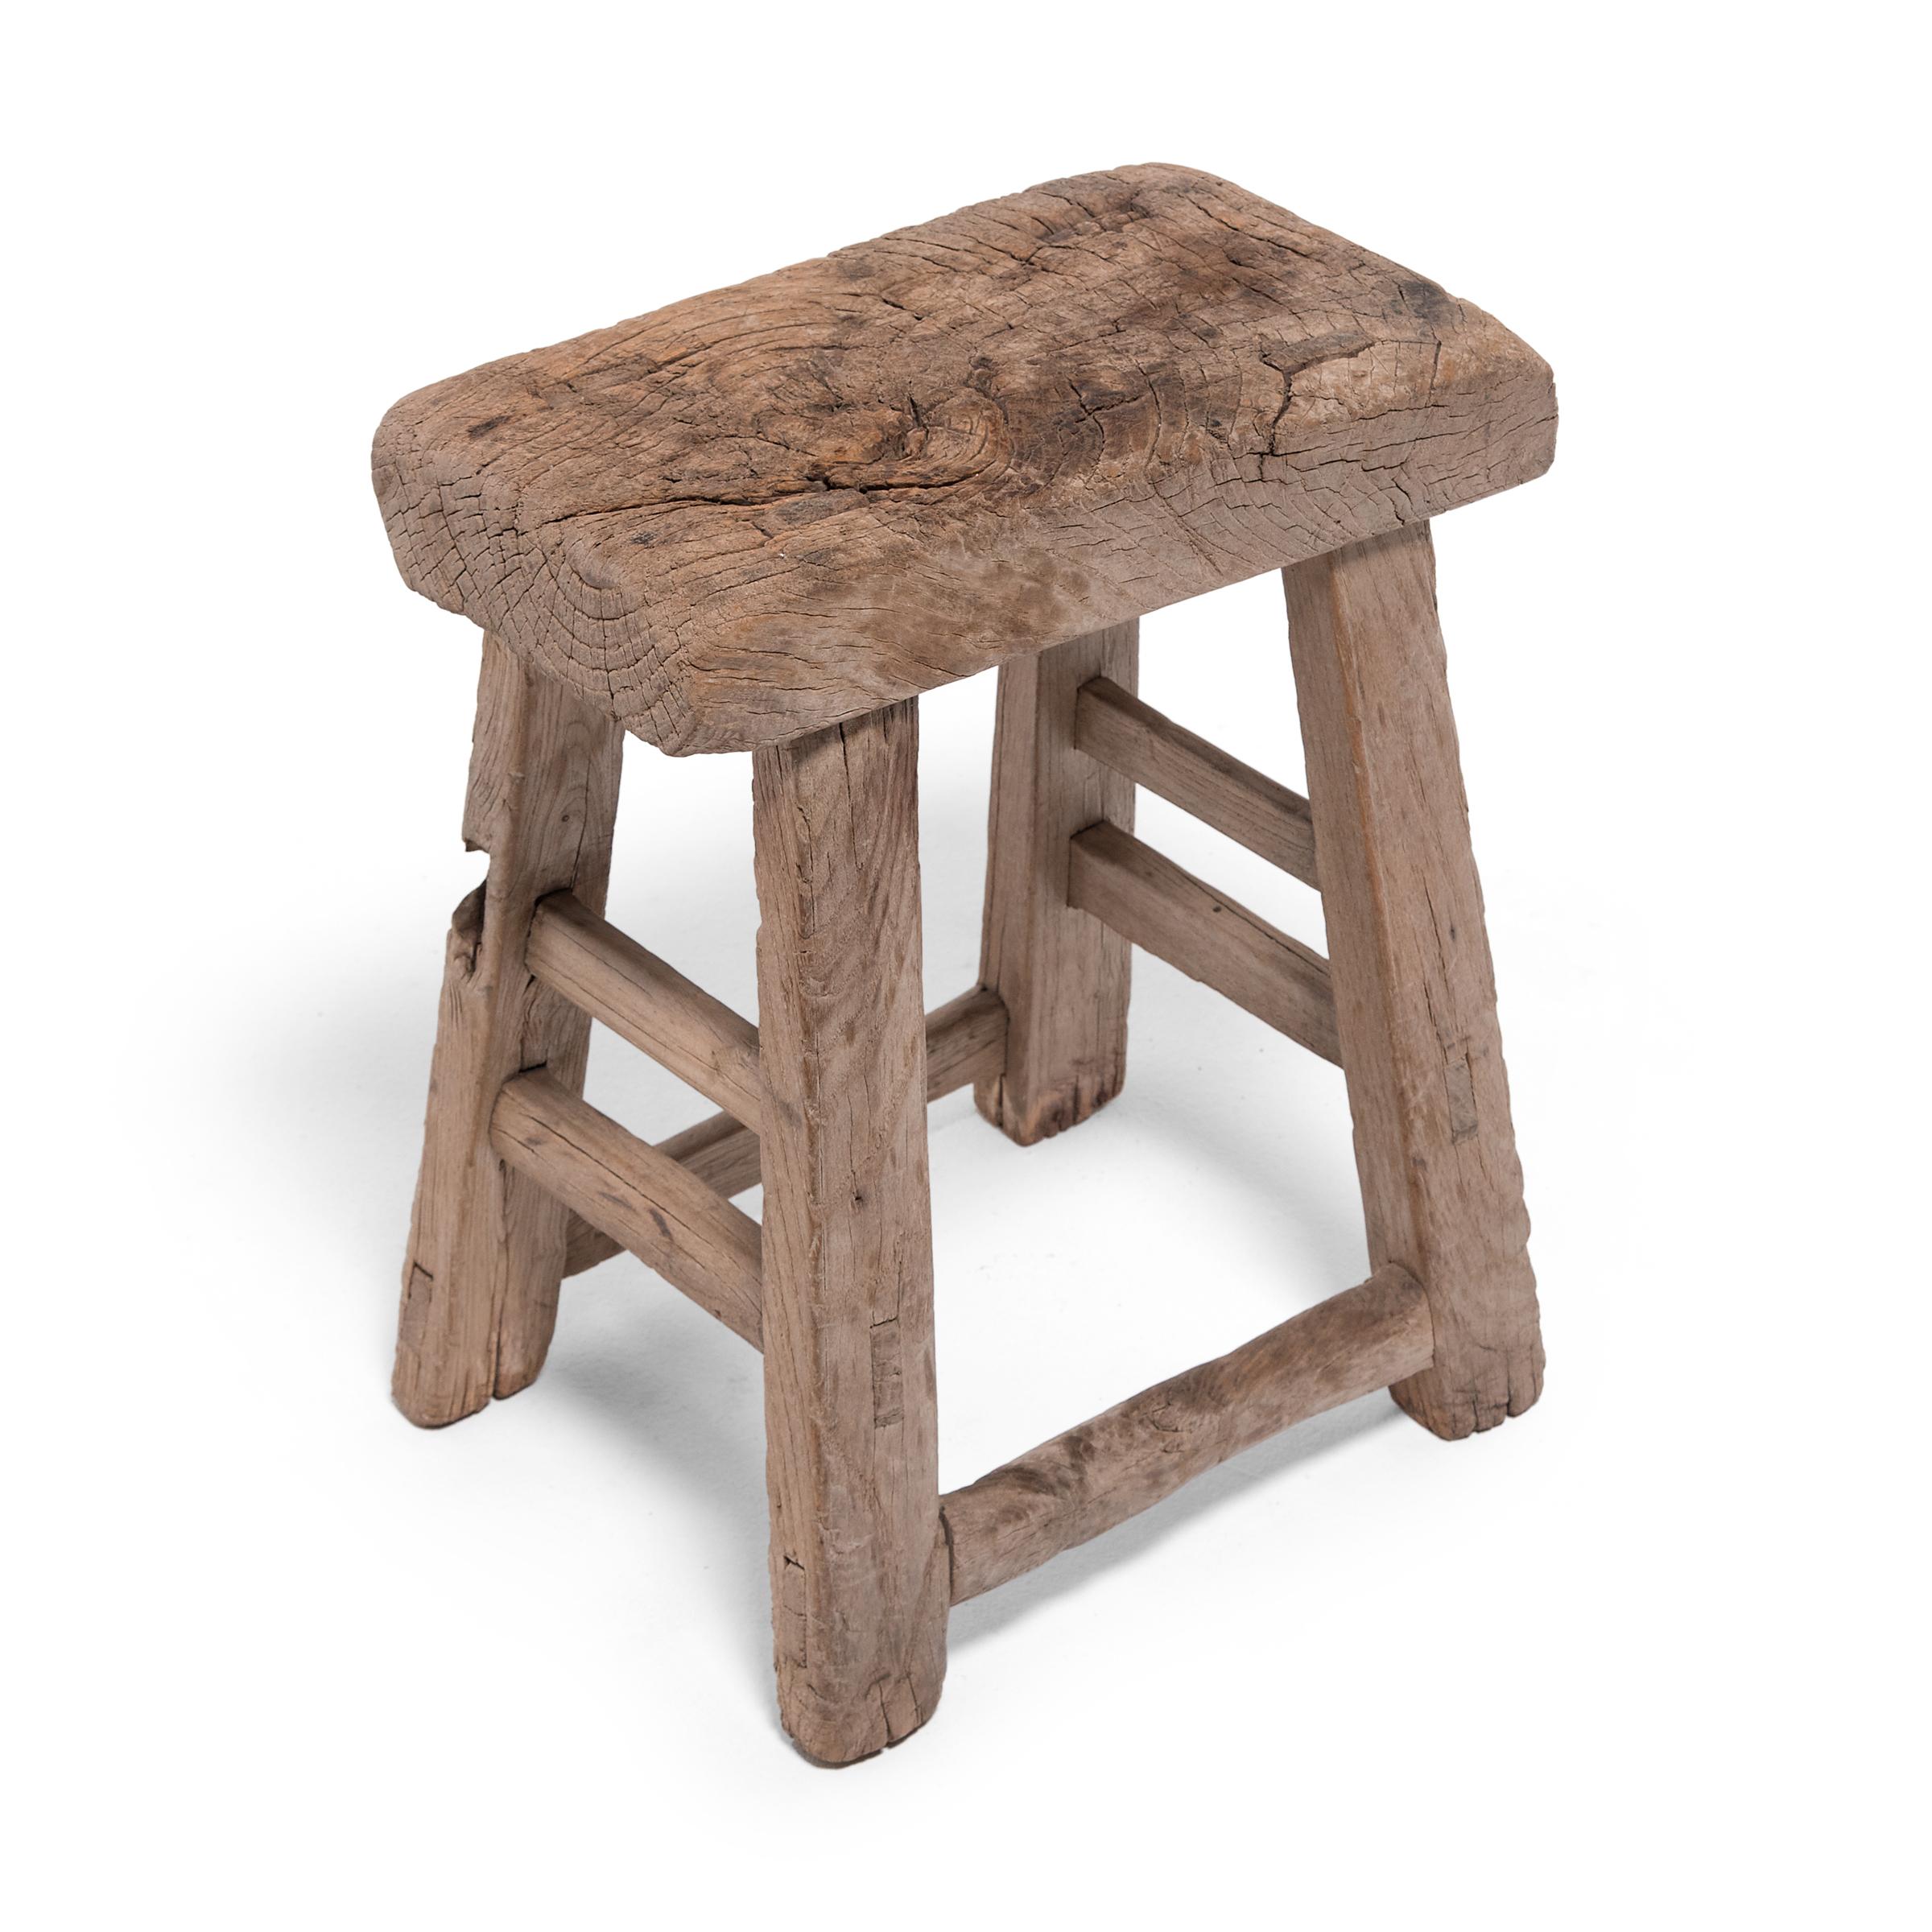 Dated to the early 20th century, this simple stool from China's Hebei province would have been used throughout a courtyard home as lightweight and versatile seating. The stool's rectangular seat was rift-sawn to reveal grain patterns running